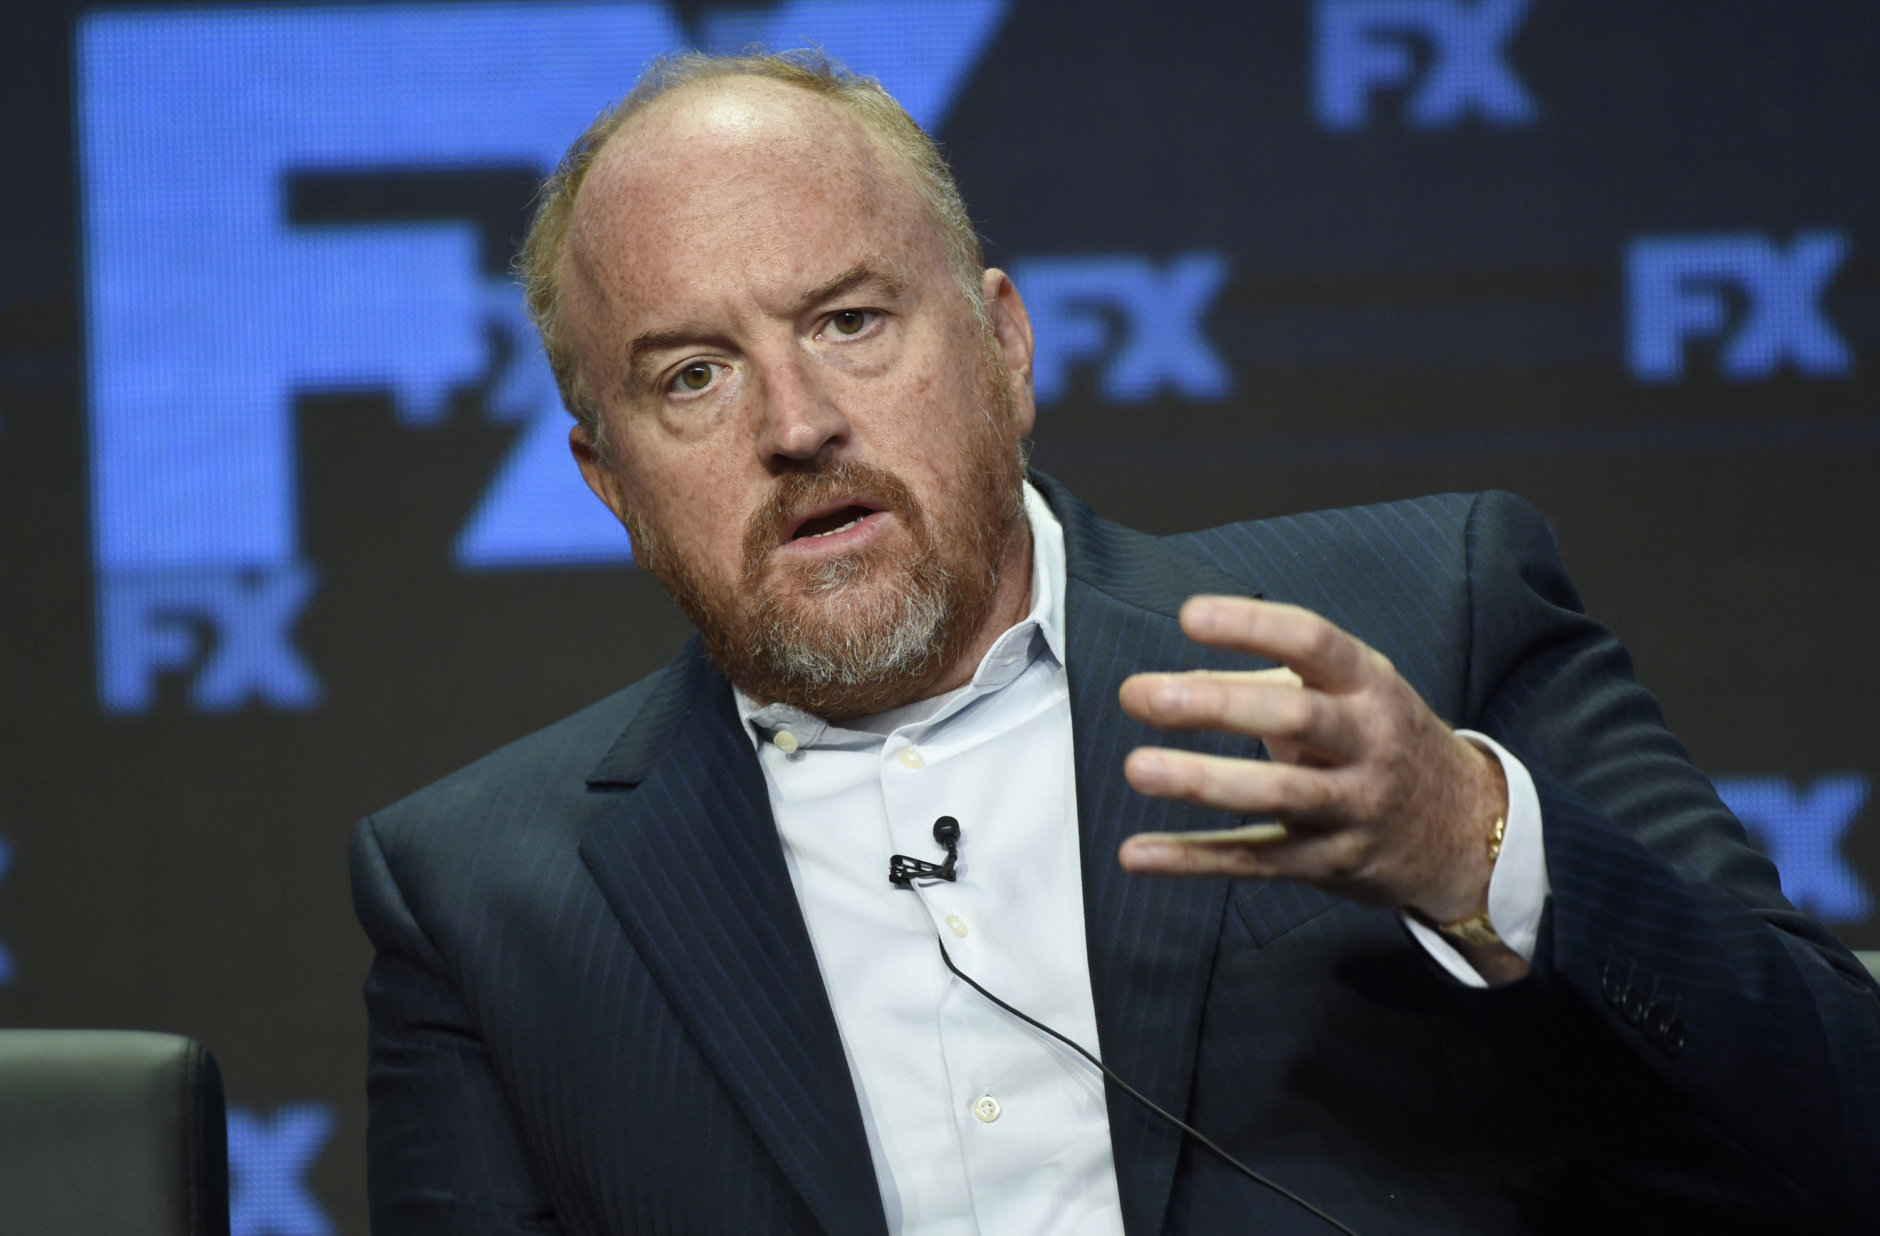 Louis C.K., co-creator/writer/executive producer, participates in the "Better Things" panel during the FX Television Critics Association Summer Press Tour at the Beverly Hilton on Wednesday, Aug. 9, 2017, in Beverly Hills, Calif. (Photo by Chris Pizzello/Invision/AP)